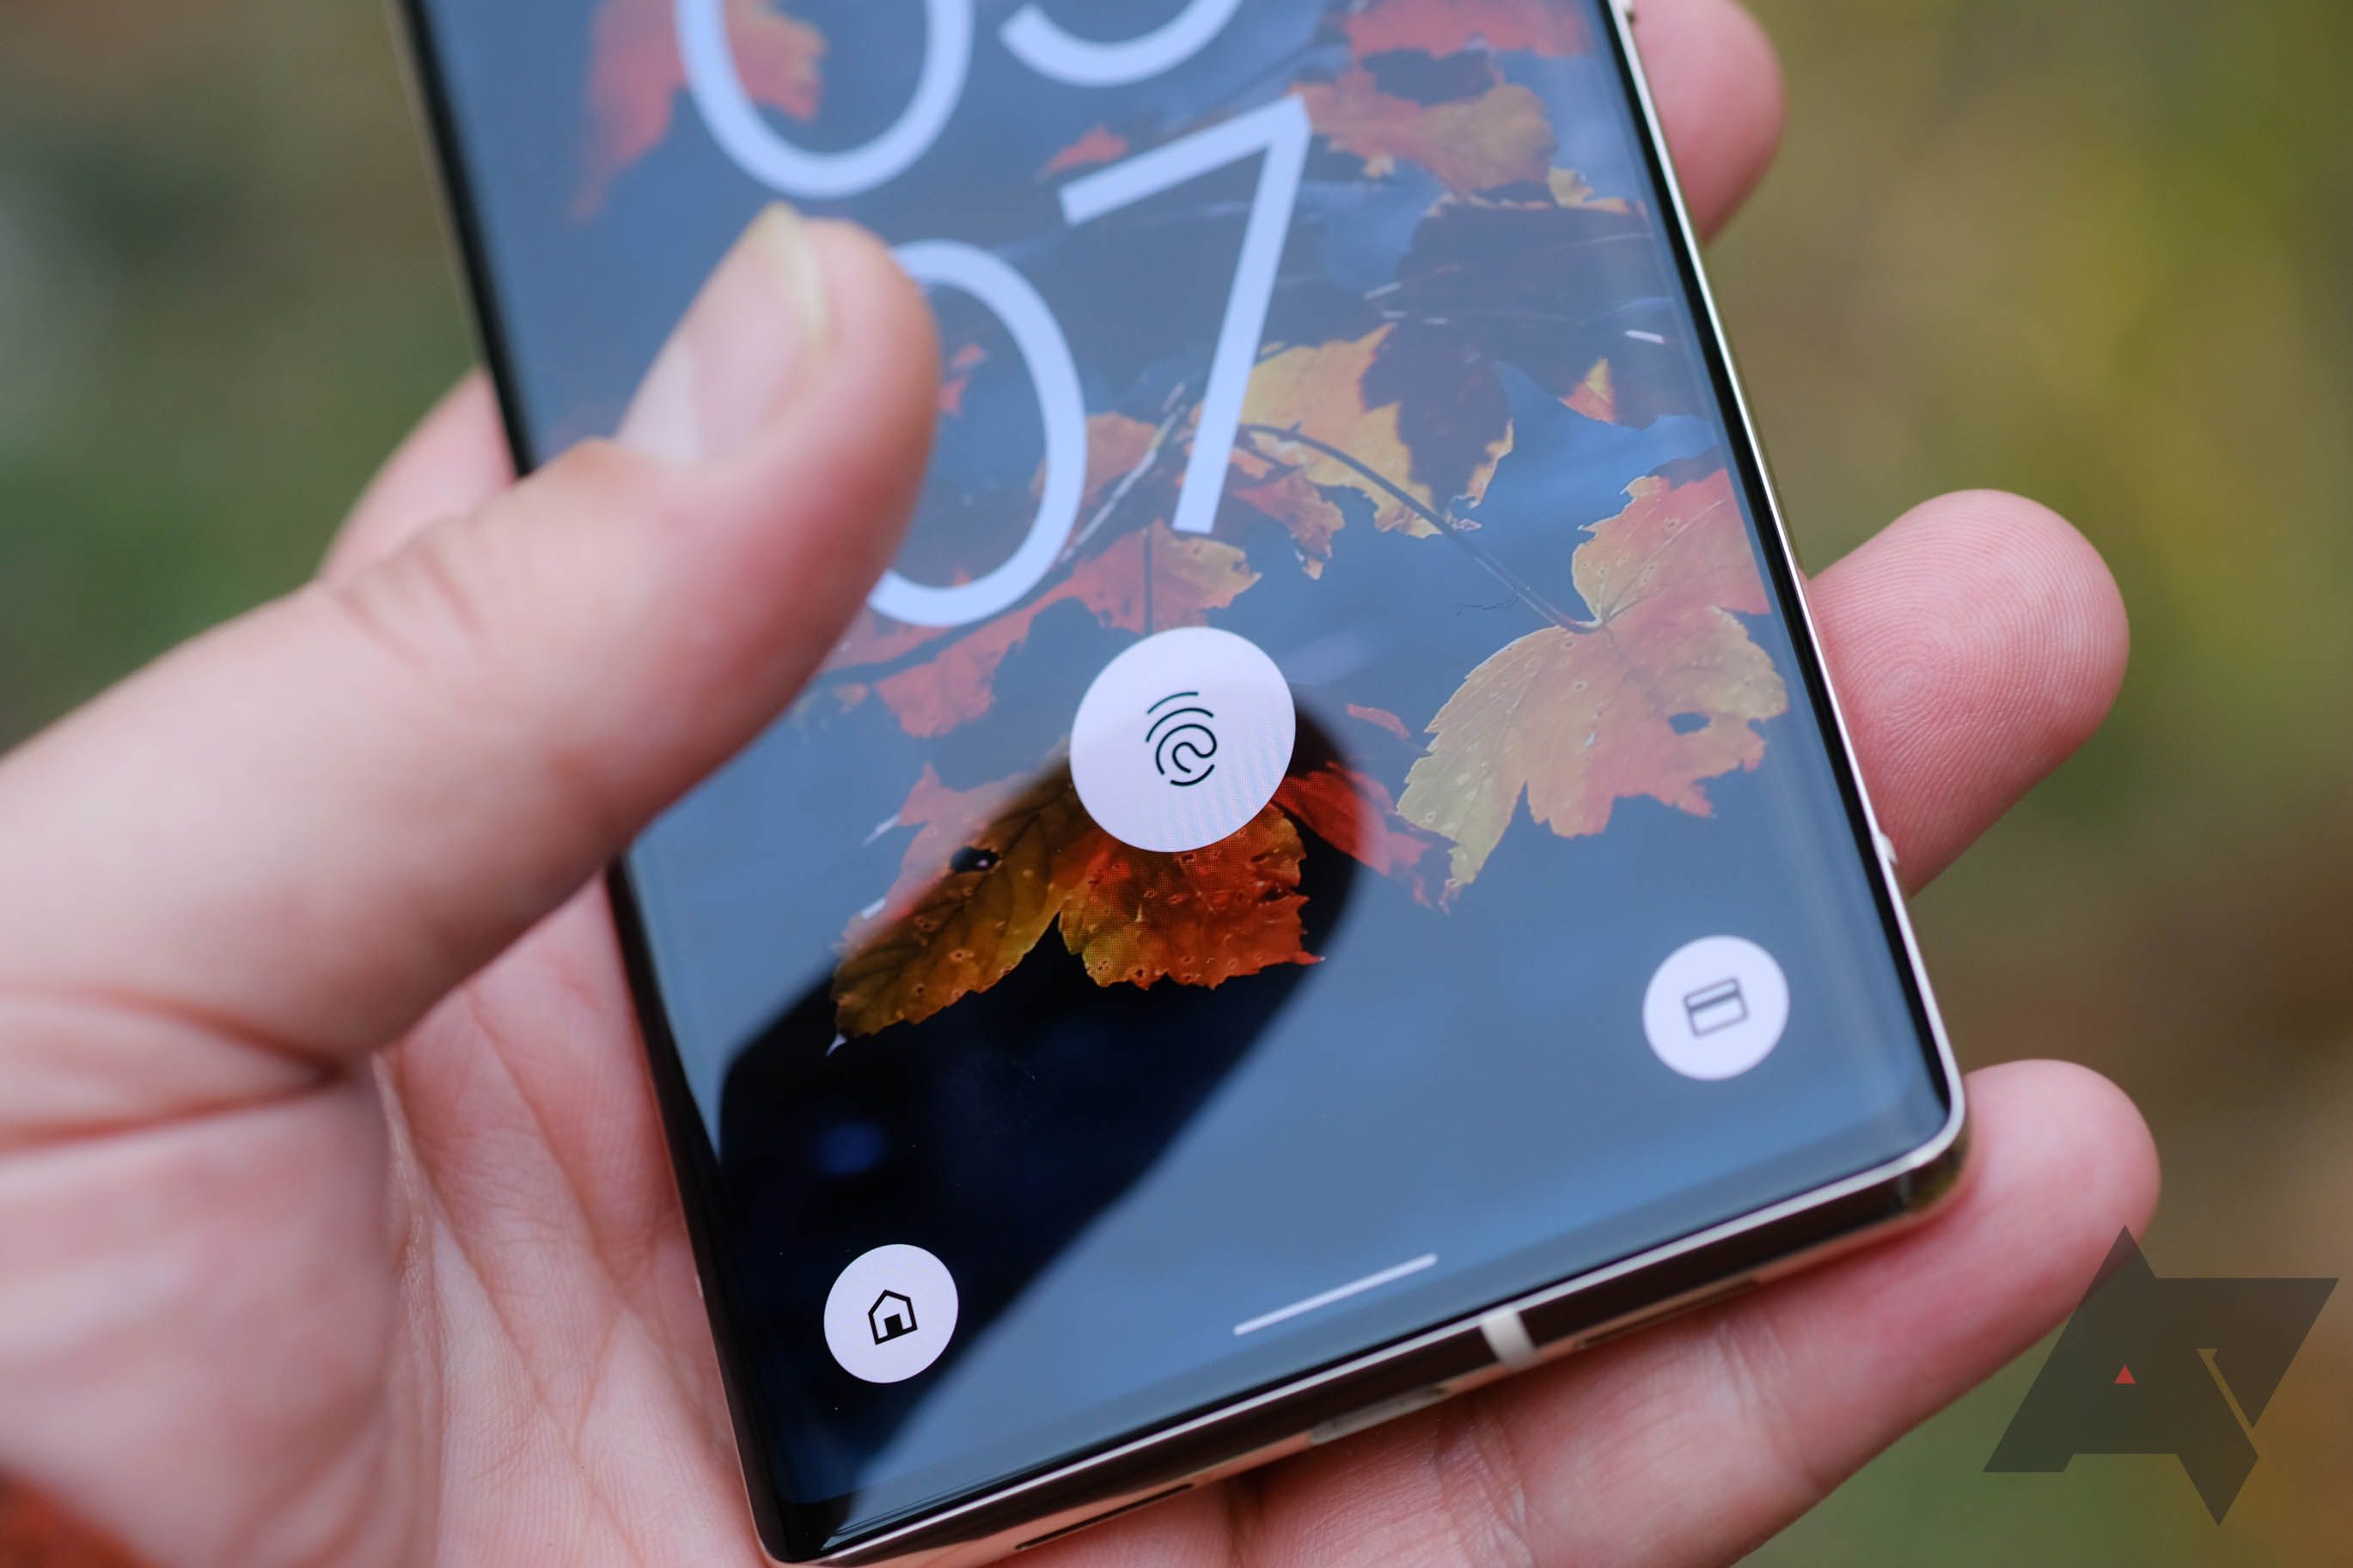 Android 12L Beta 3 shows off some fresh unlock animations